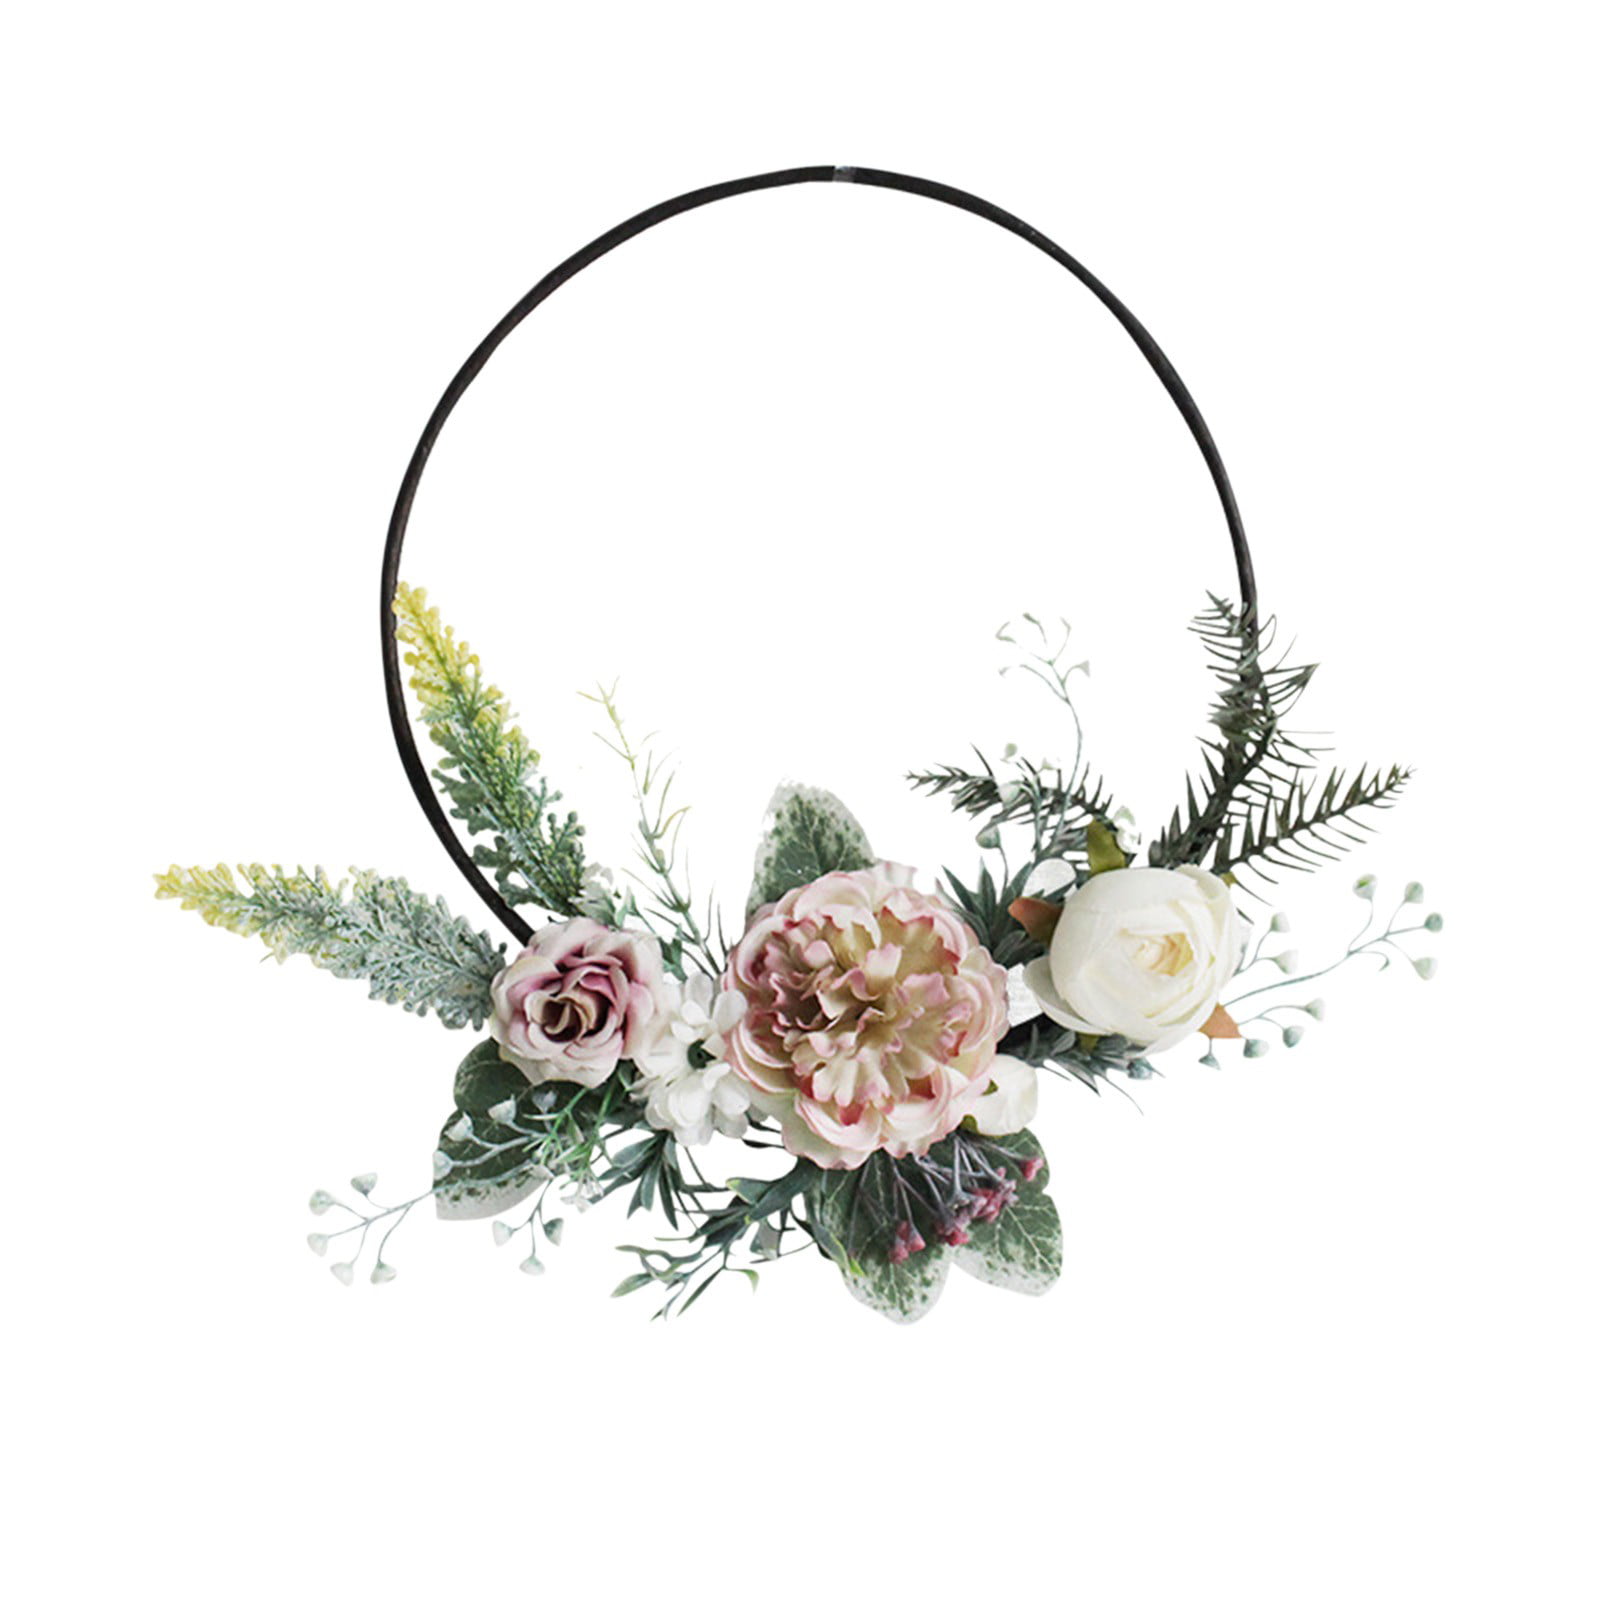 holiday wall hanging Gold hoop 4 wall hanging decor with white and red dried flowers Holiday wreath Christmas flowers